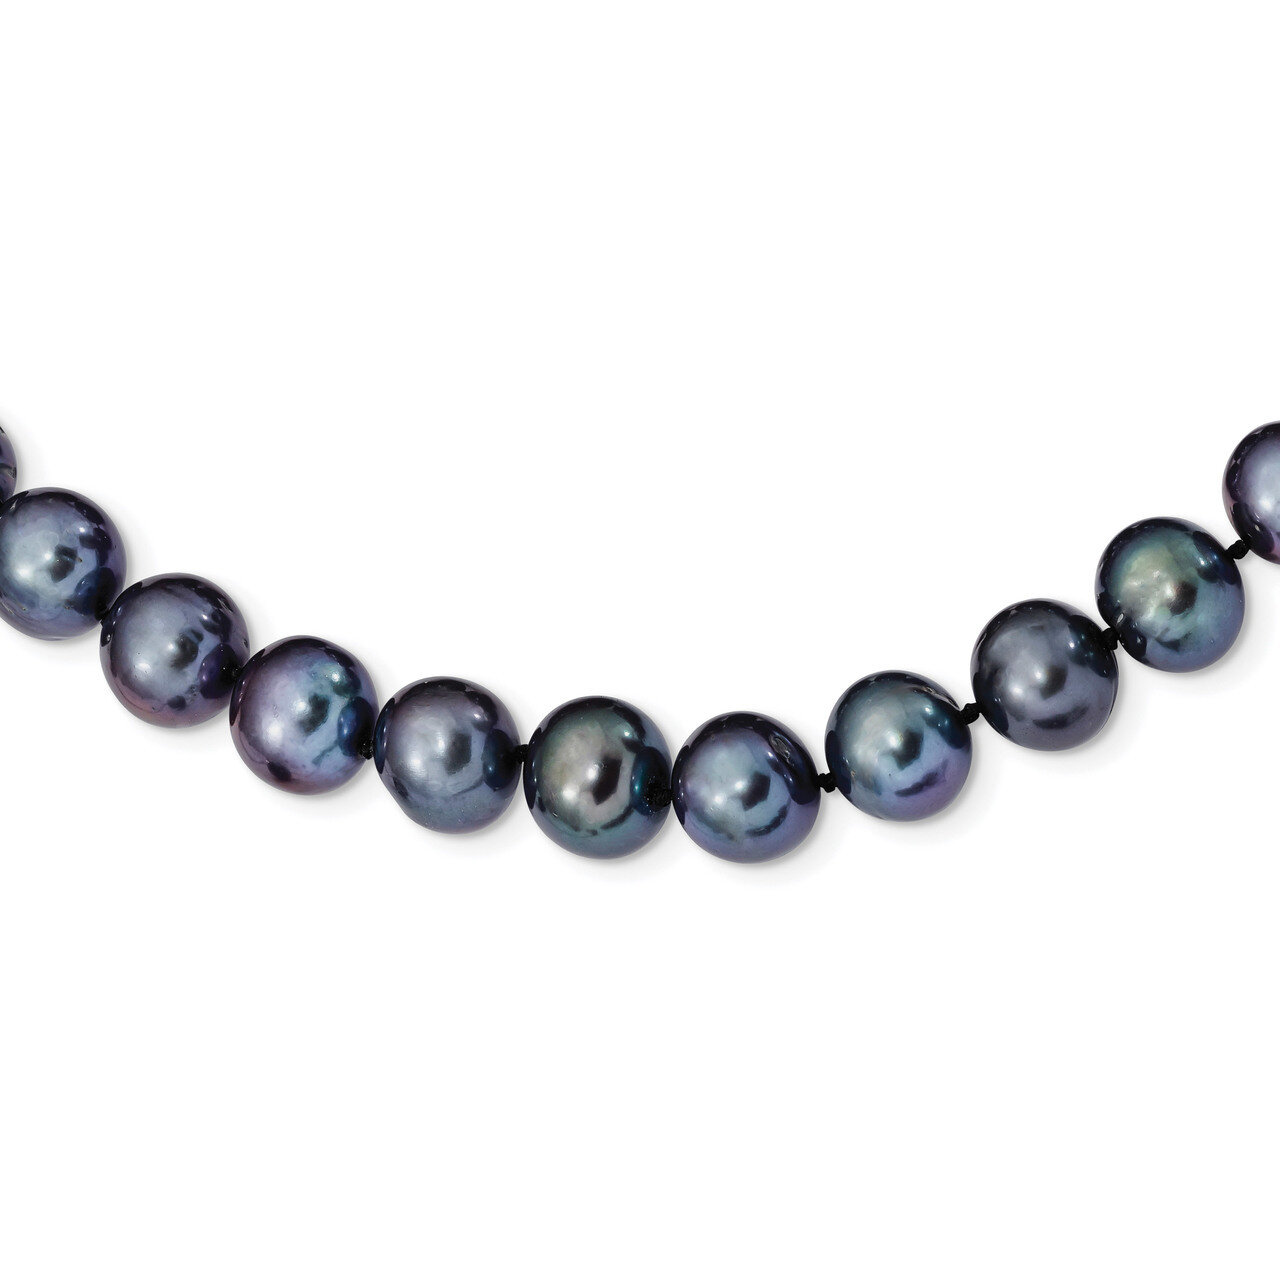 10-11mm Black Cultured Freshwater Pearl Necklace 28 Inch Sterling Silver Rhodium-plated QH5158-28